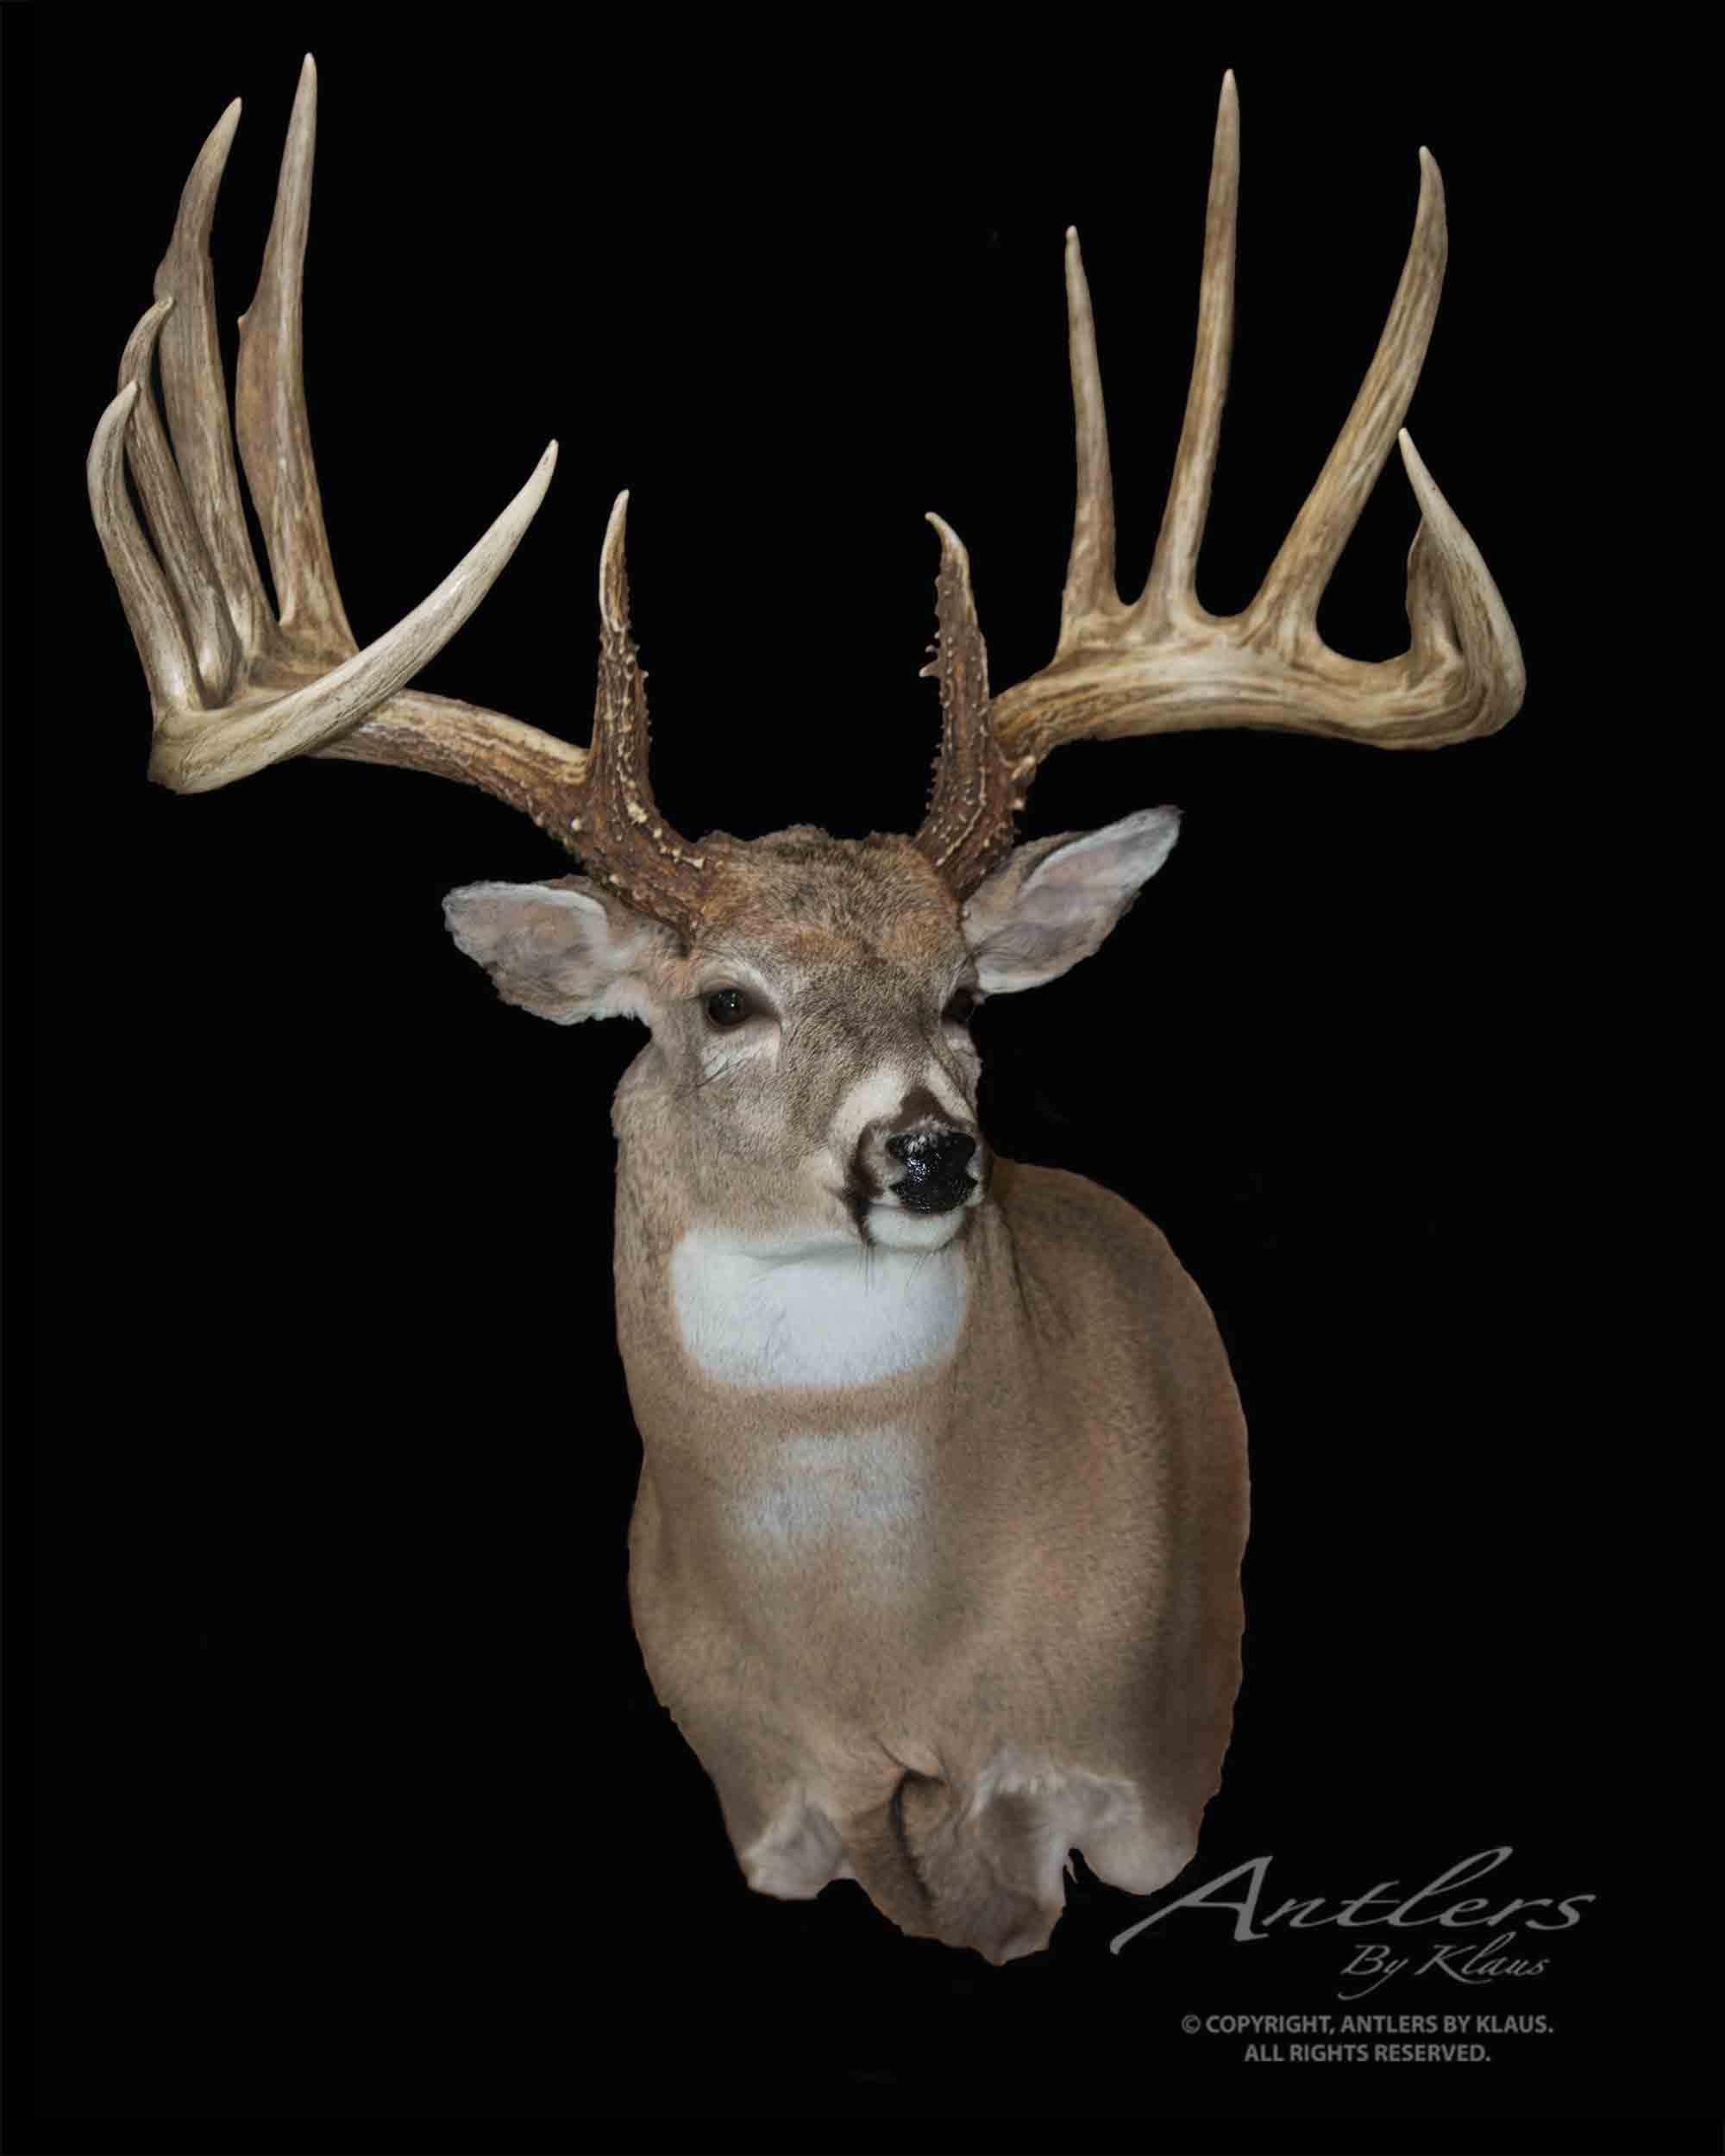 General Sheds - Antlers by Klaus